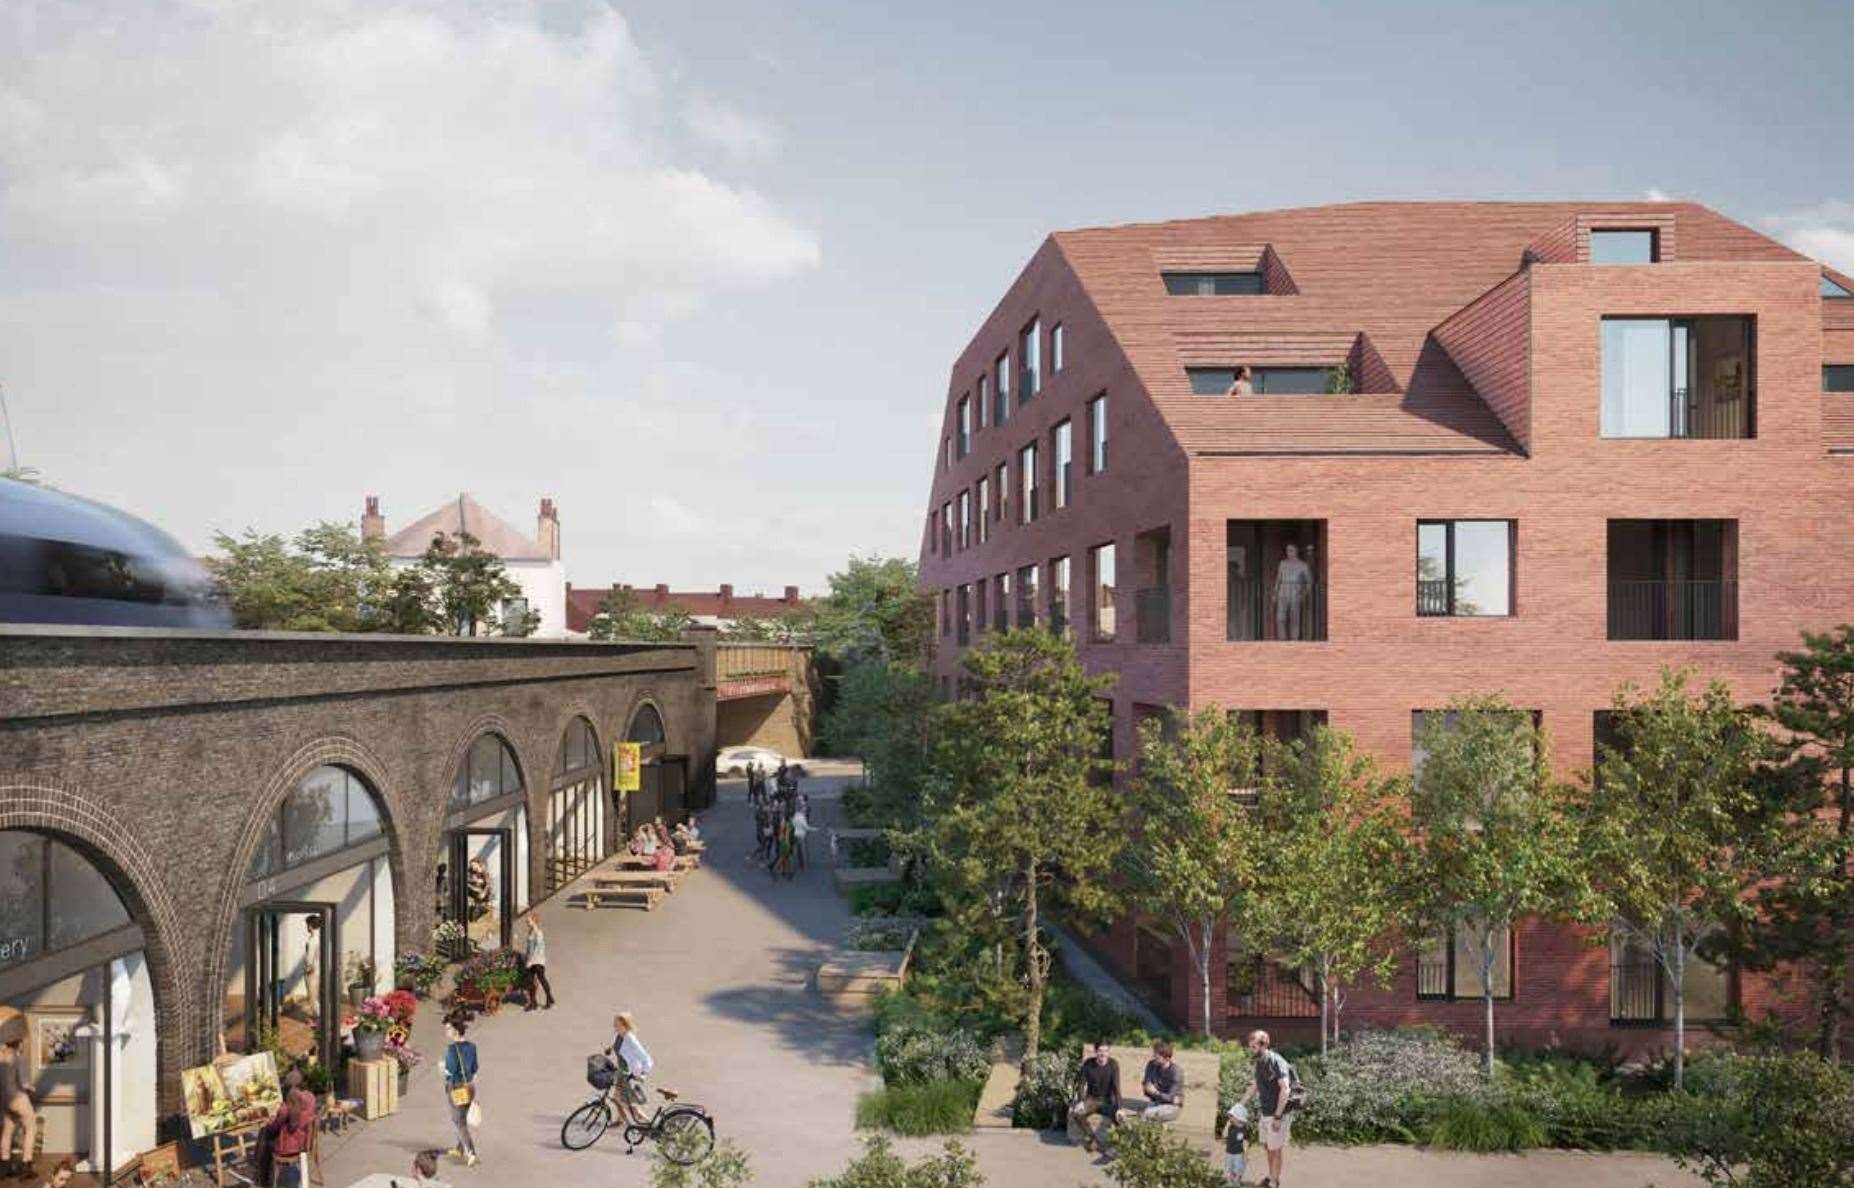 An impression of how the flats and railway arches could look